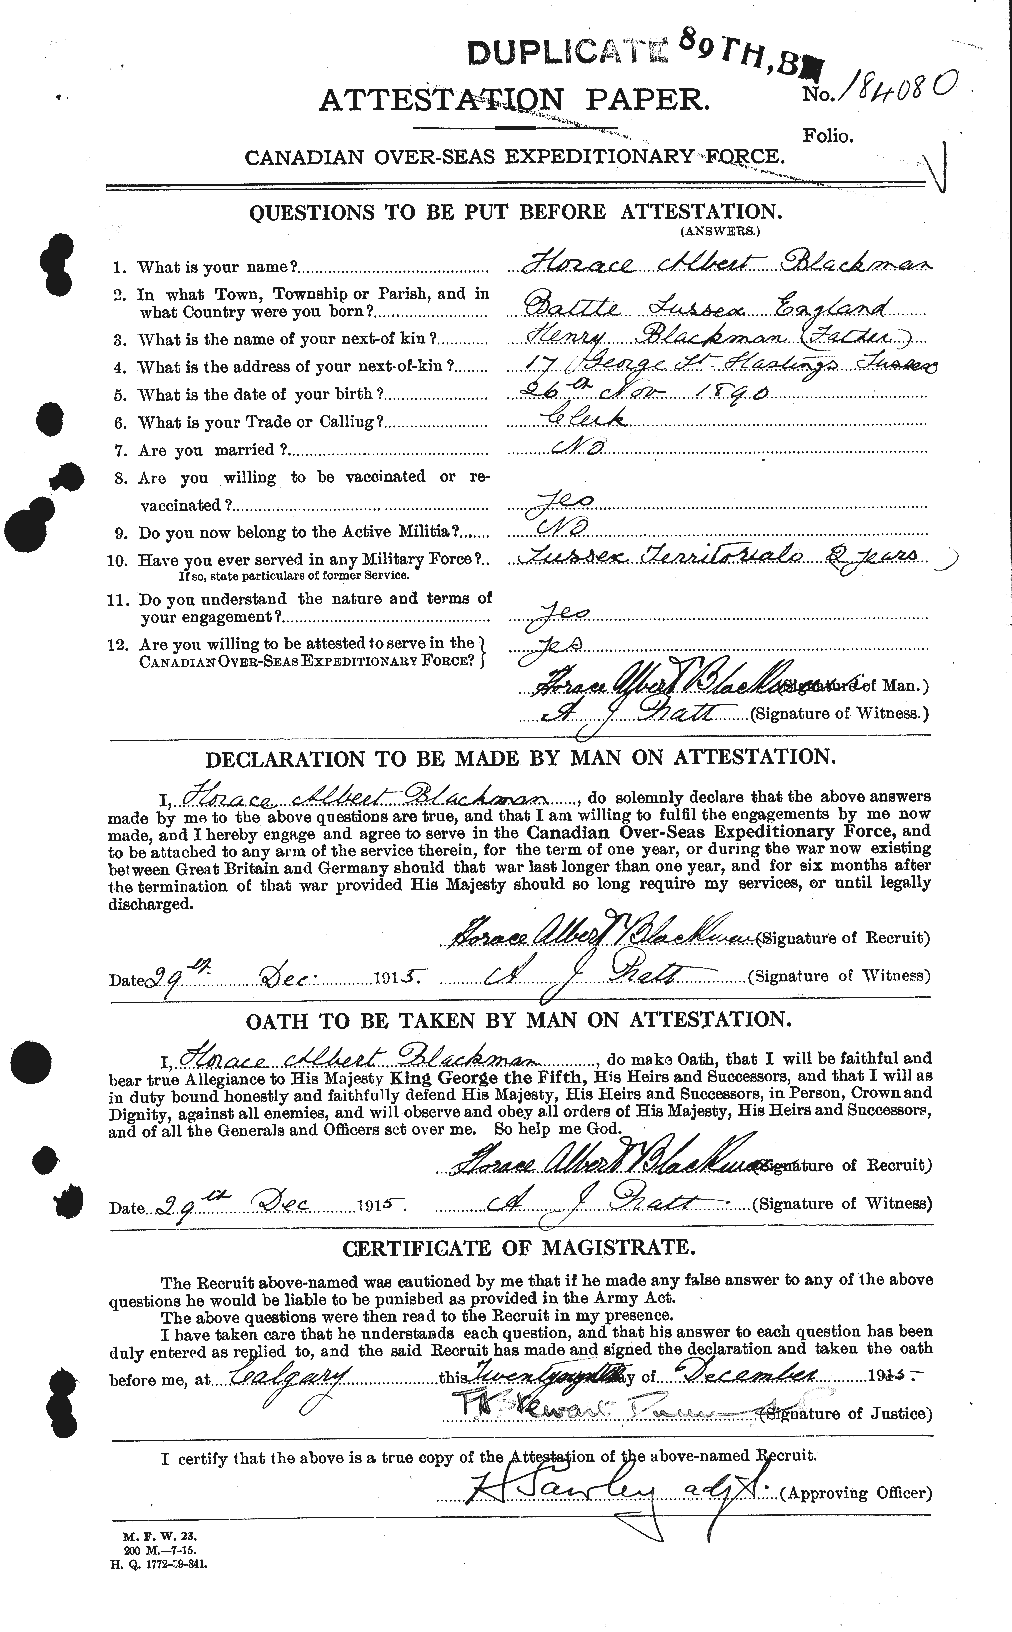 Personnel Records of the First World War - CEF 248319a